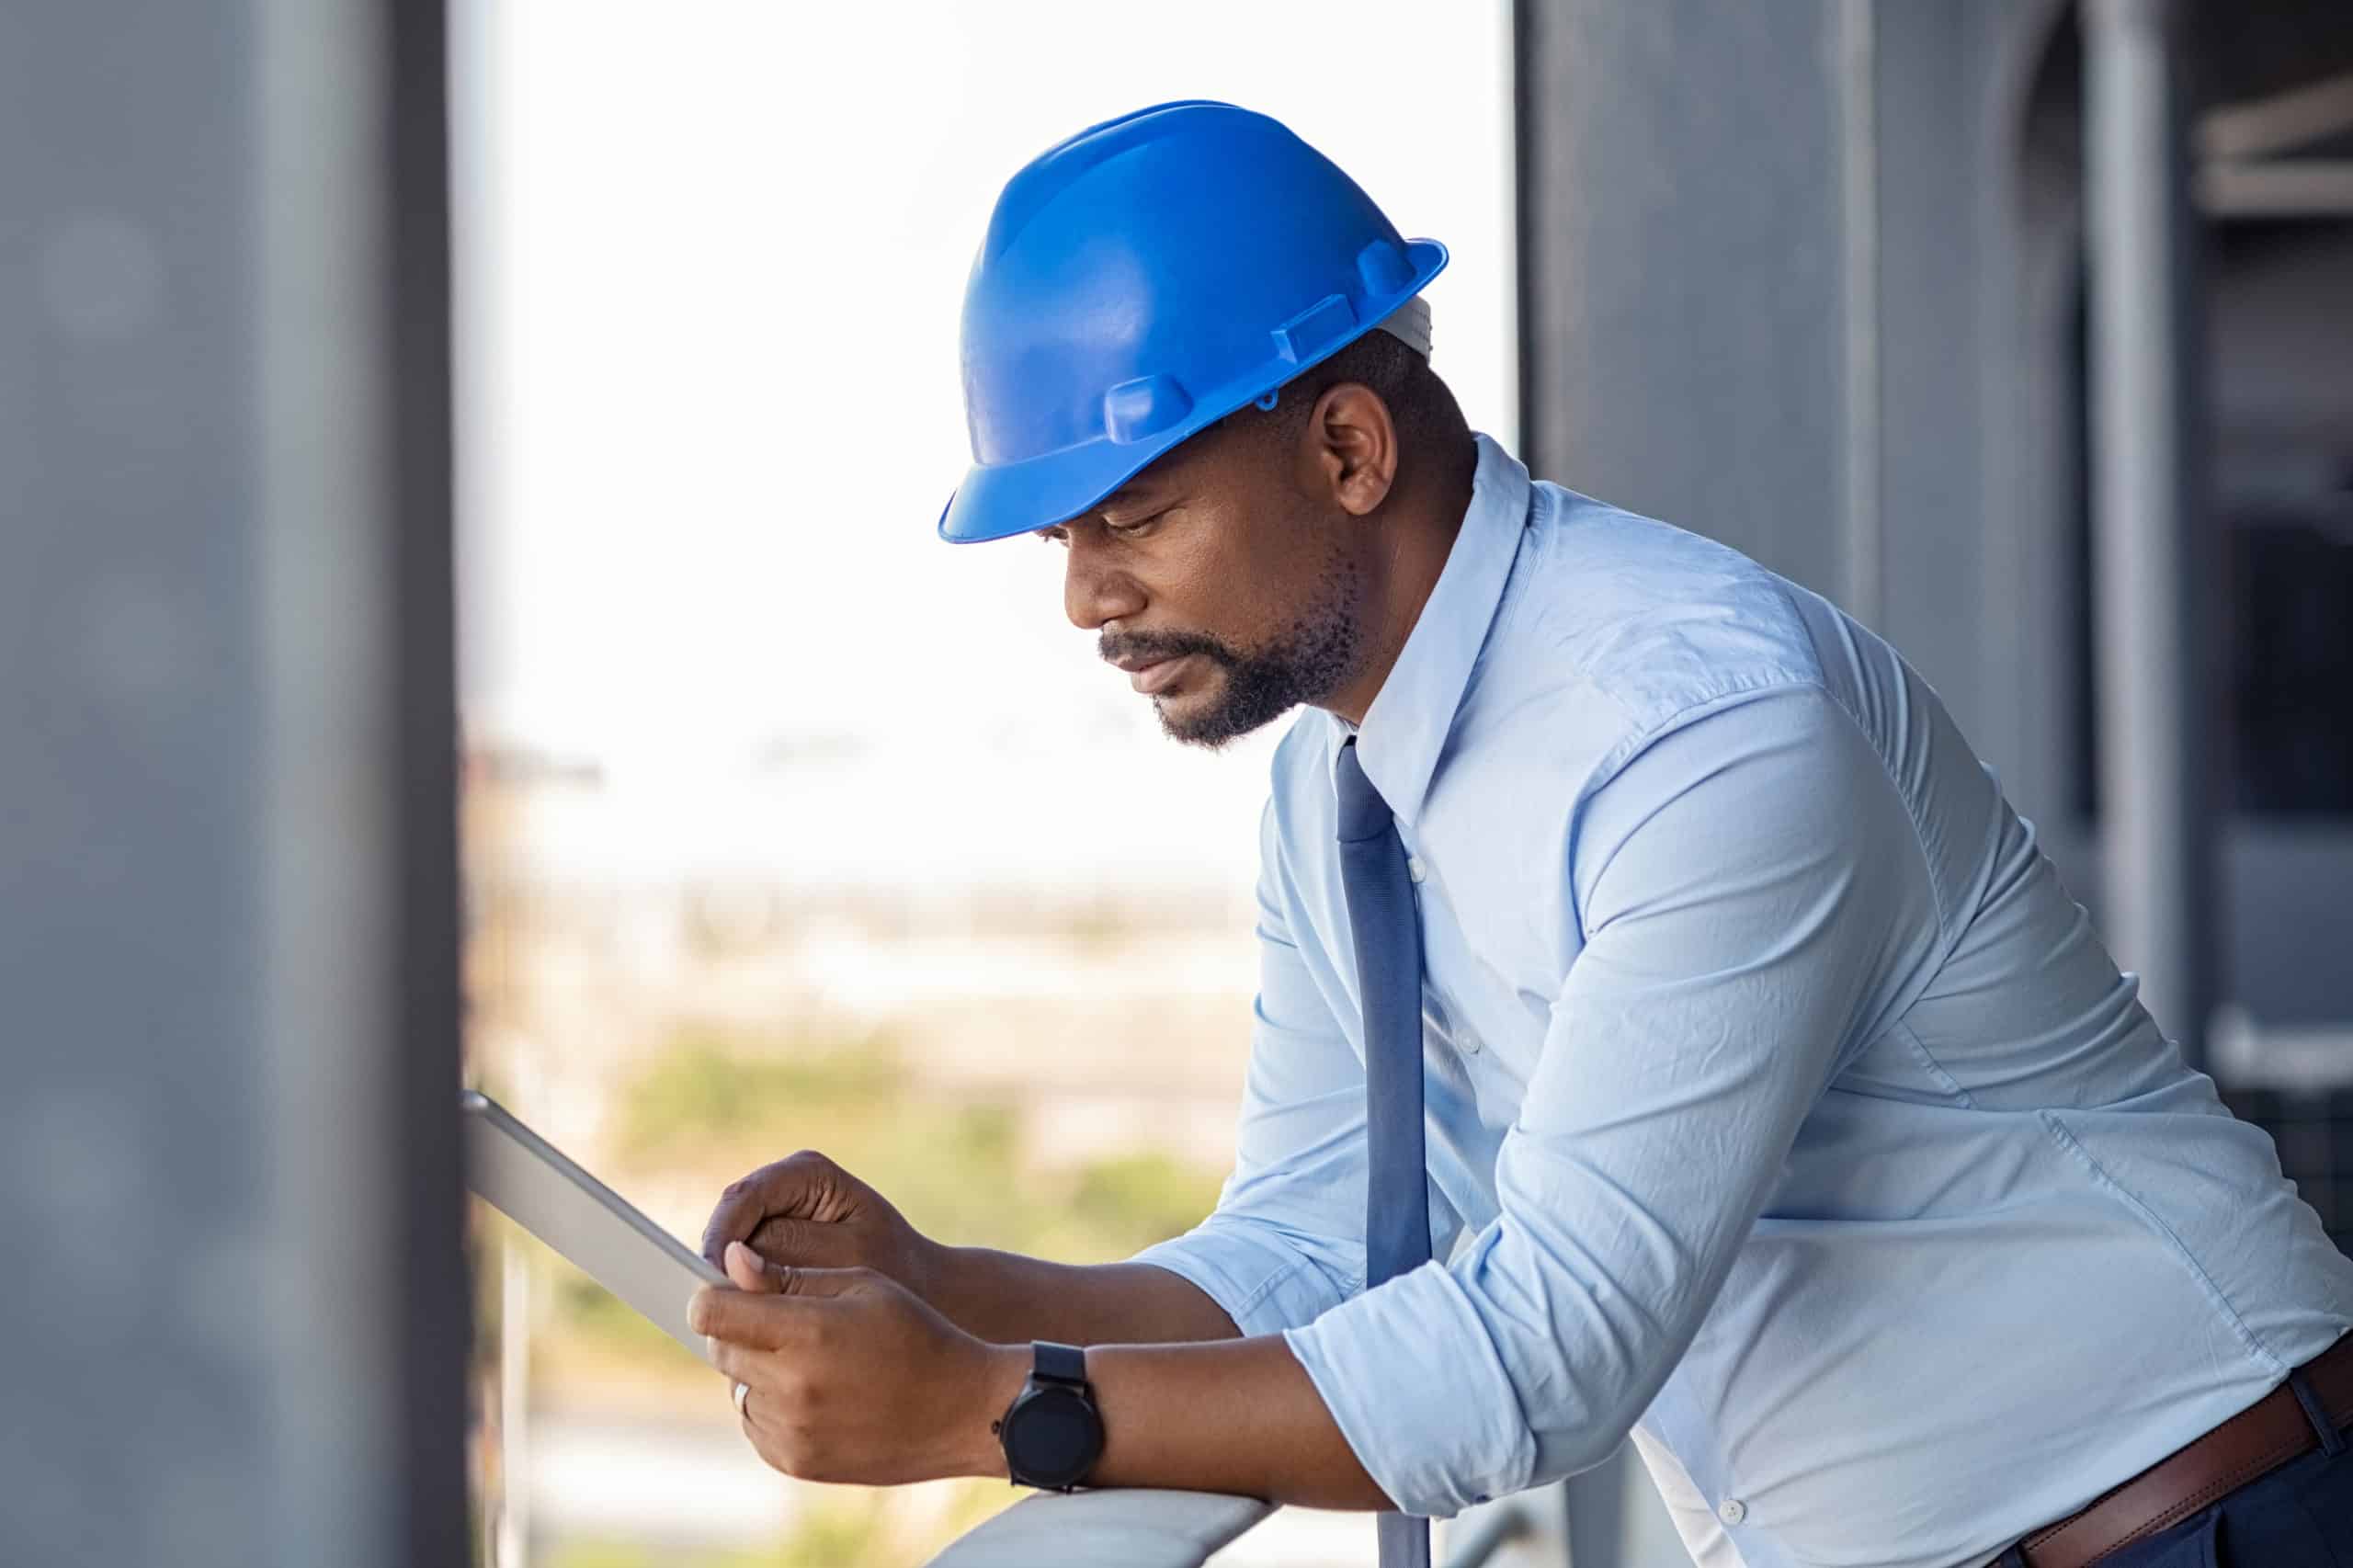 A general contractor wearing a blue hardhat checks his professional email communication on his tablet.